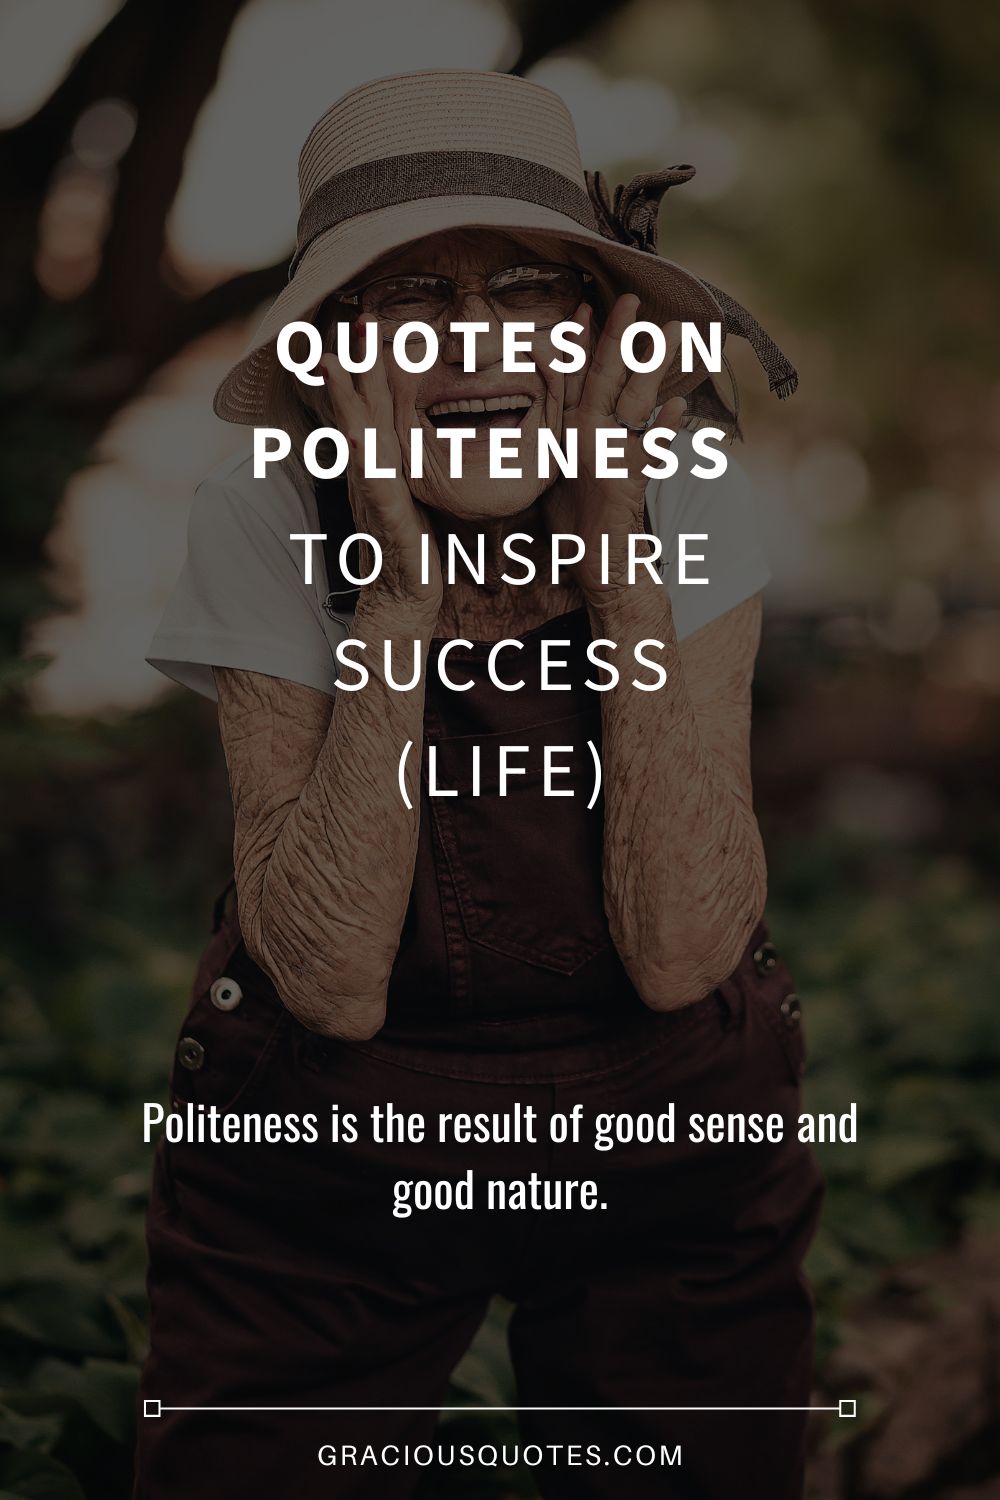 Quotes on Politeness to Inspire Success (LIFE) - Gracious Quotes